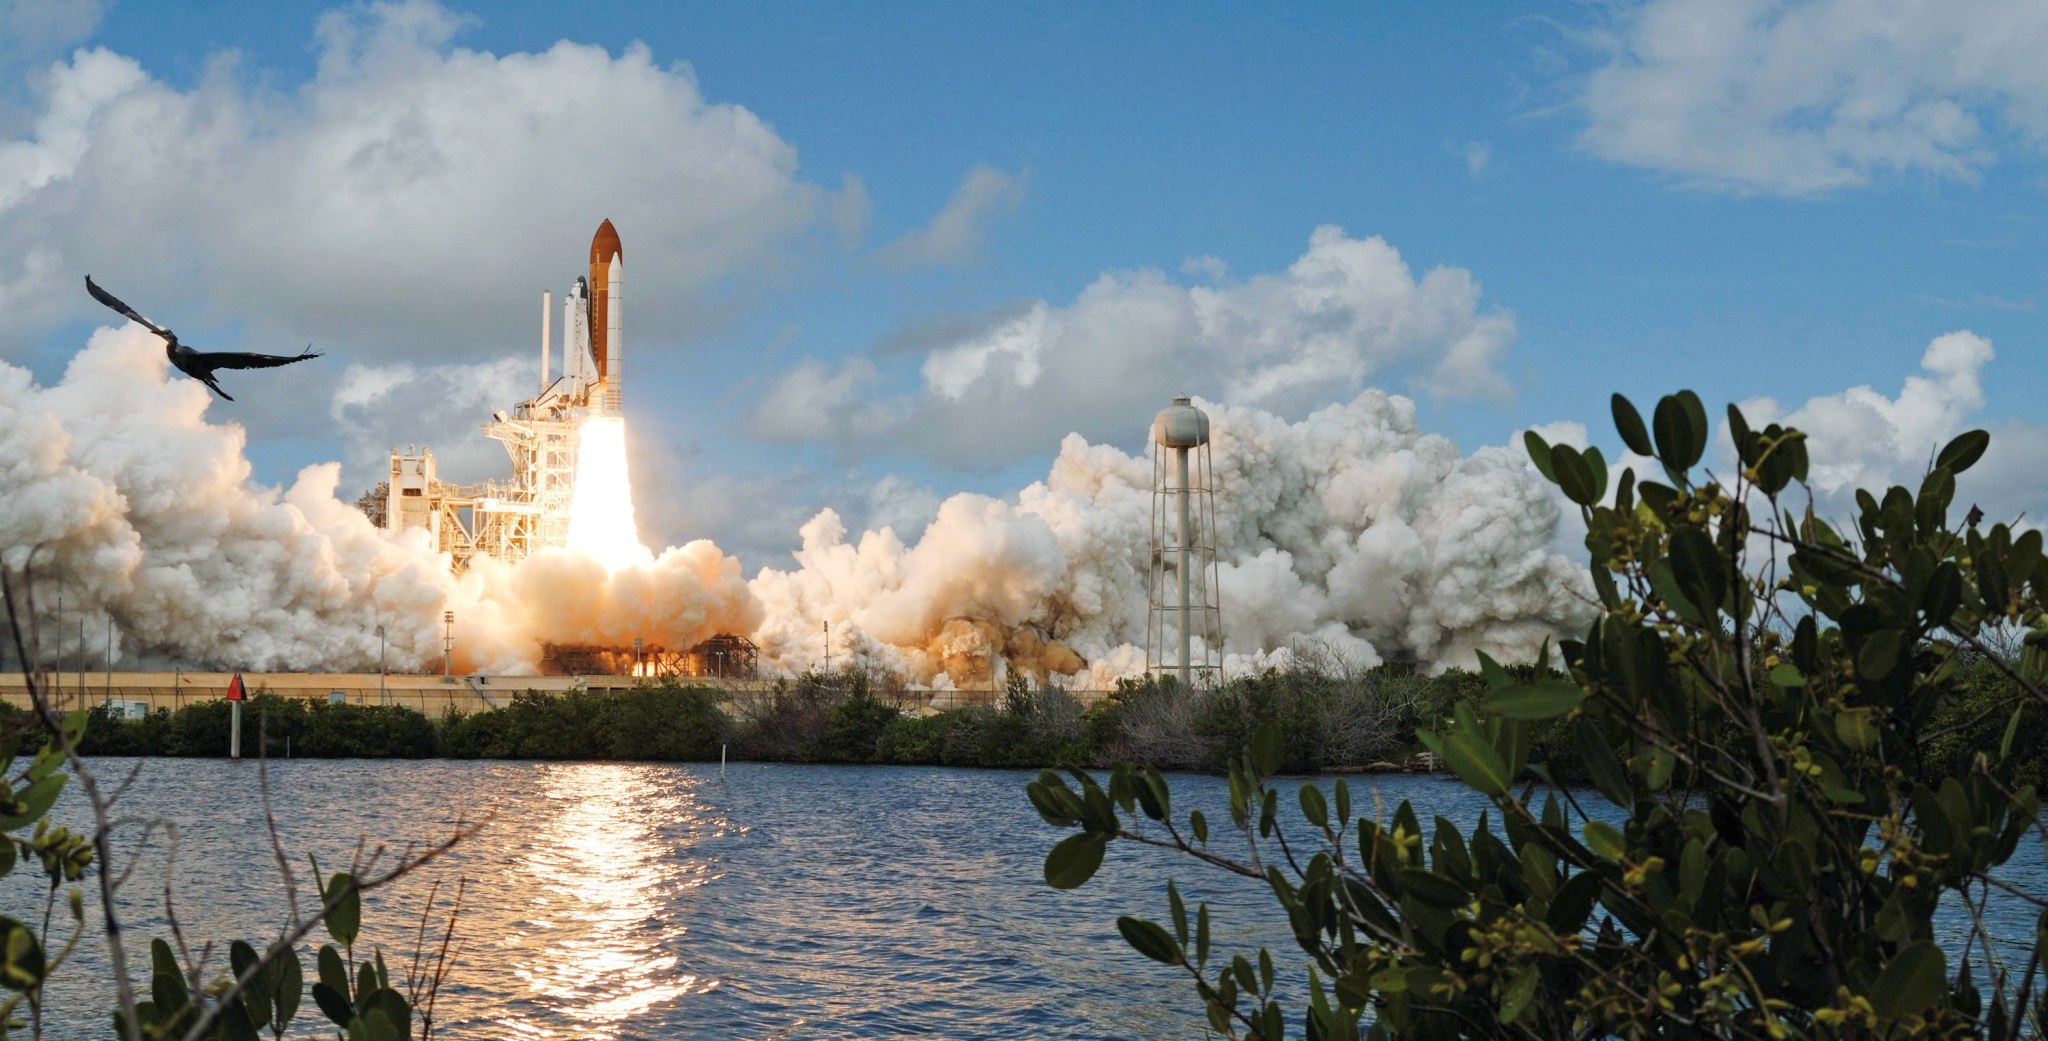 This week in 2007, space shuttle Discovery, mission STS-120, launched from NASA’s Kennedy Space Center on a 15-day mission.